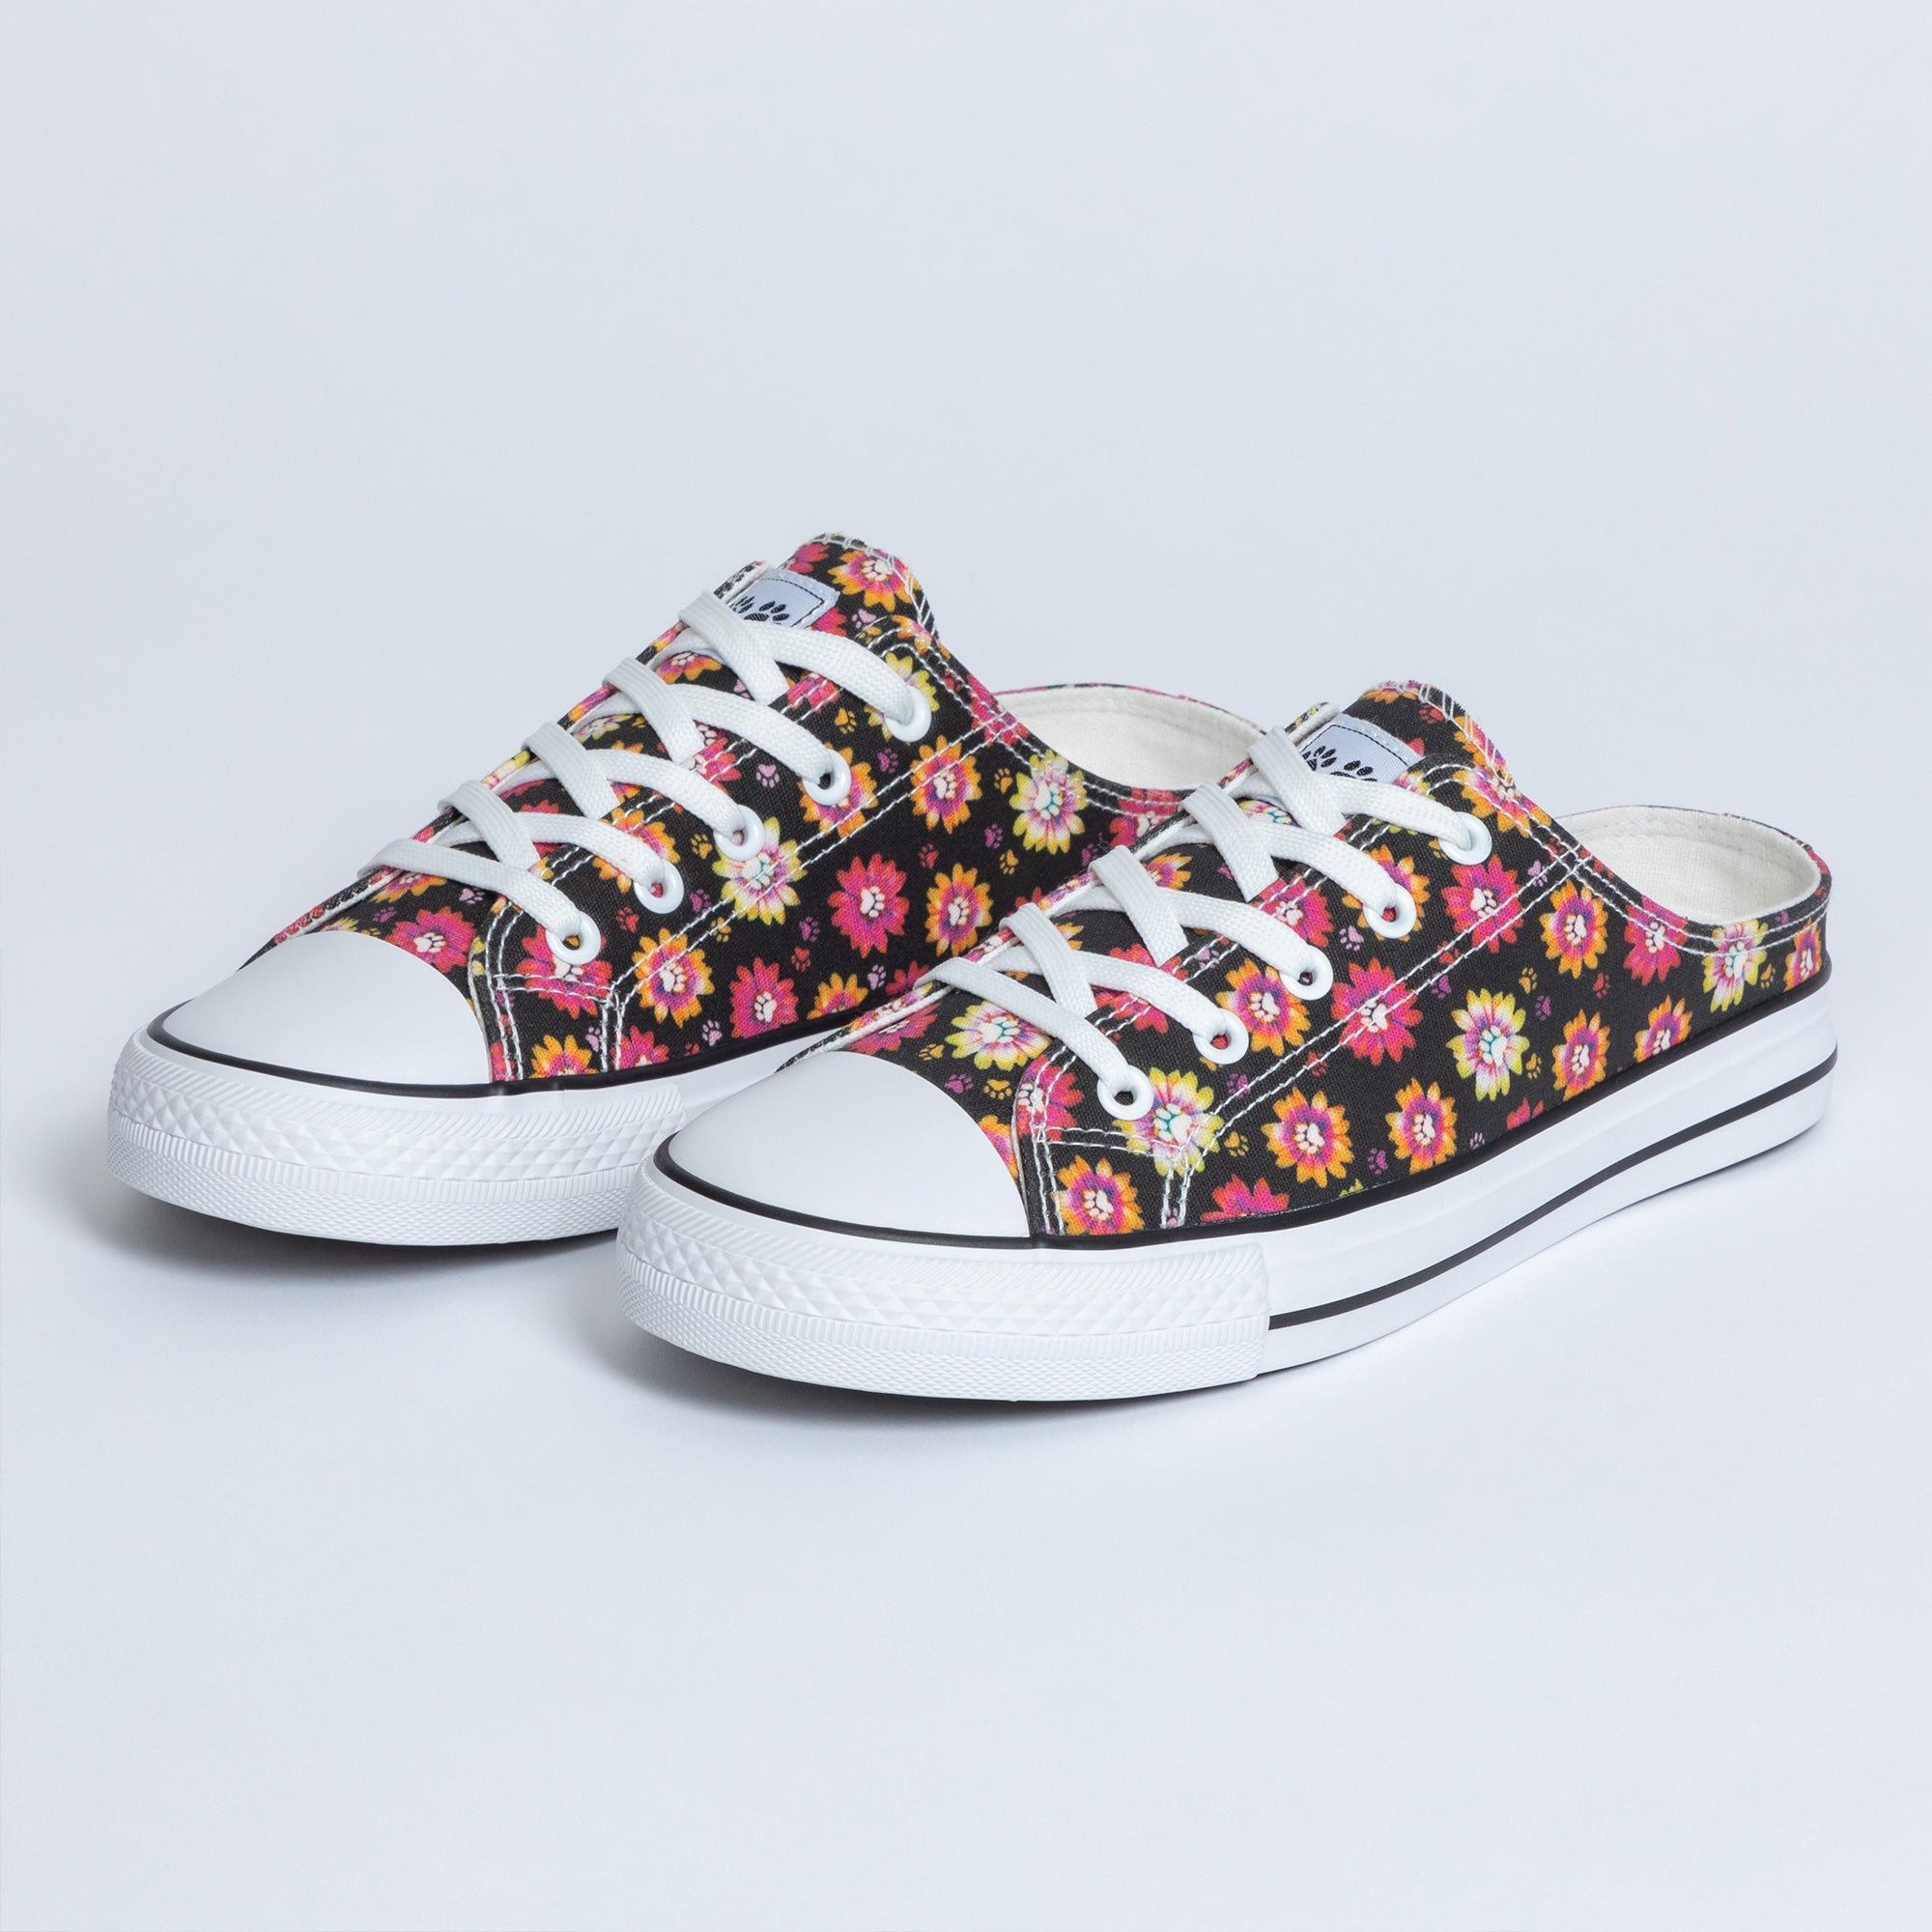 Paw Print Canvas Slip-On Sneakers - Pretty Paw Daisies - 11